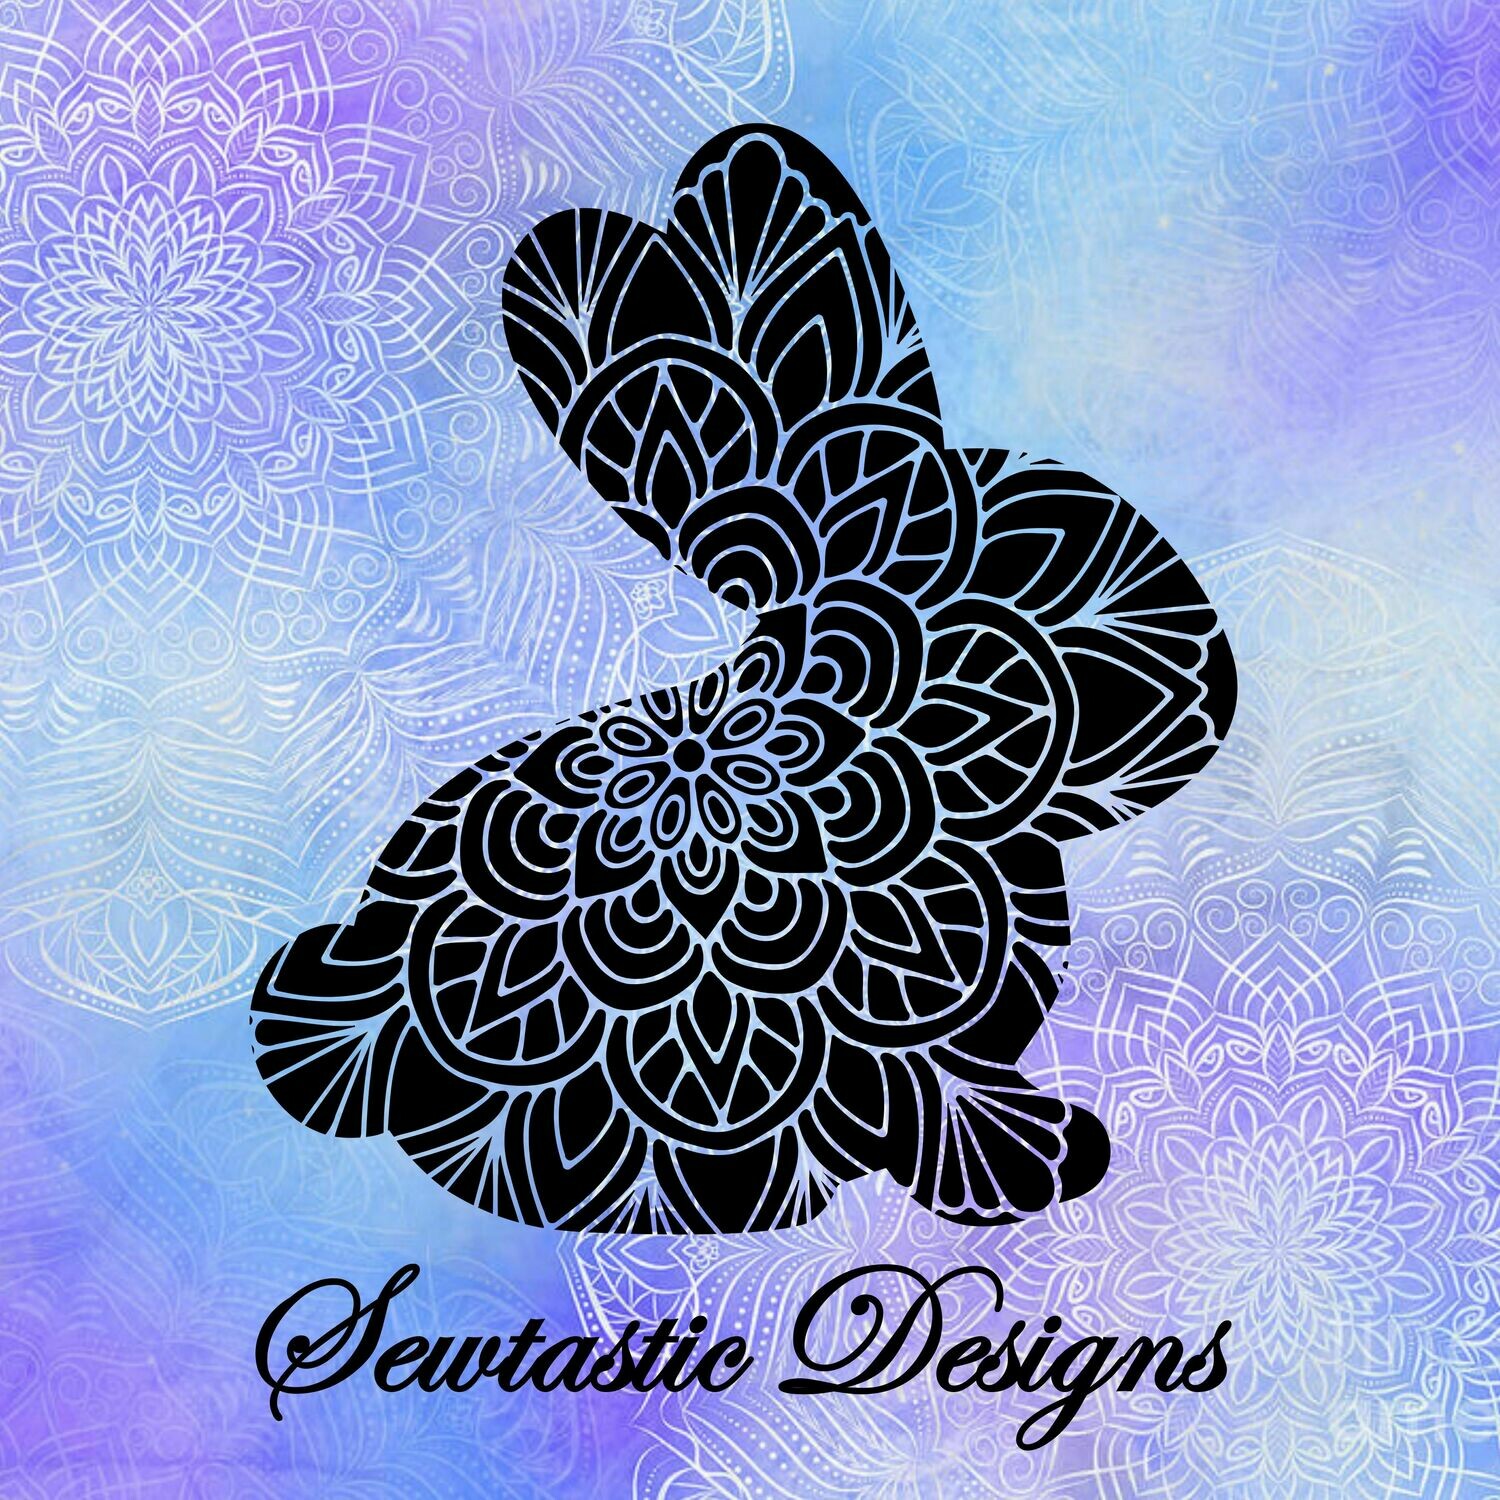 Download Easter Bunny Mandala Svg Easter Svg Bunny Svg Mandal Svg Rabbit Svg Cut File Iron On Decal Cricut Silhouette Scanncut Many More